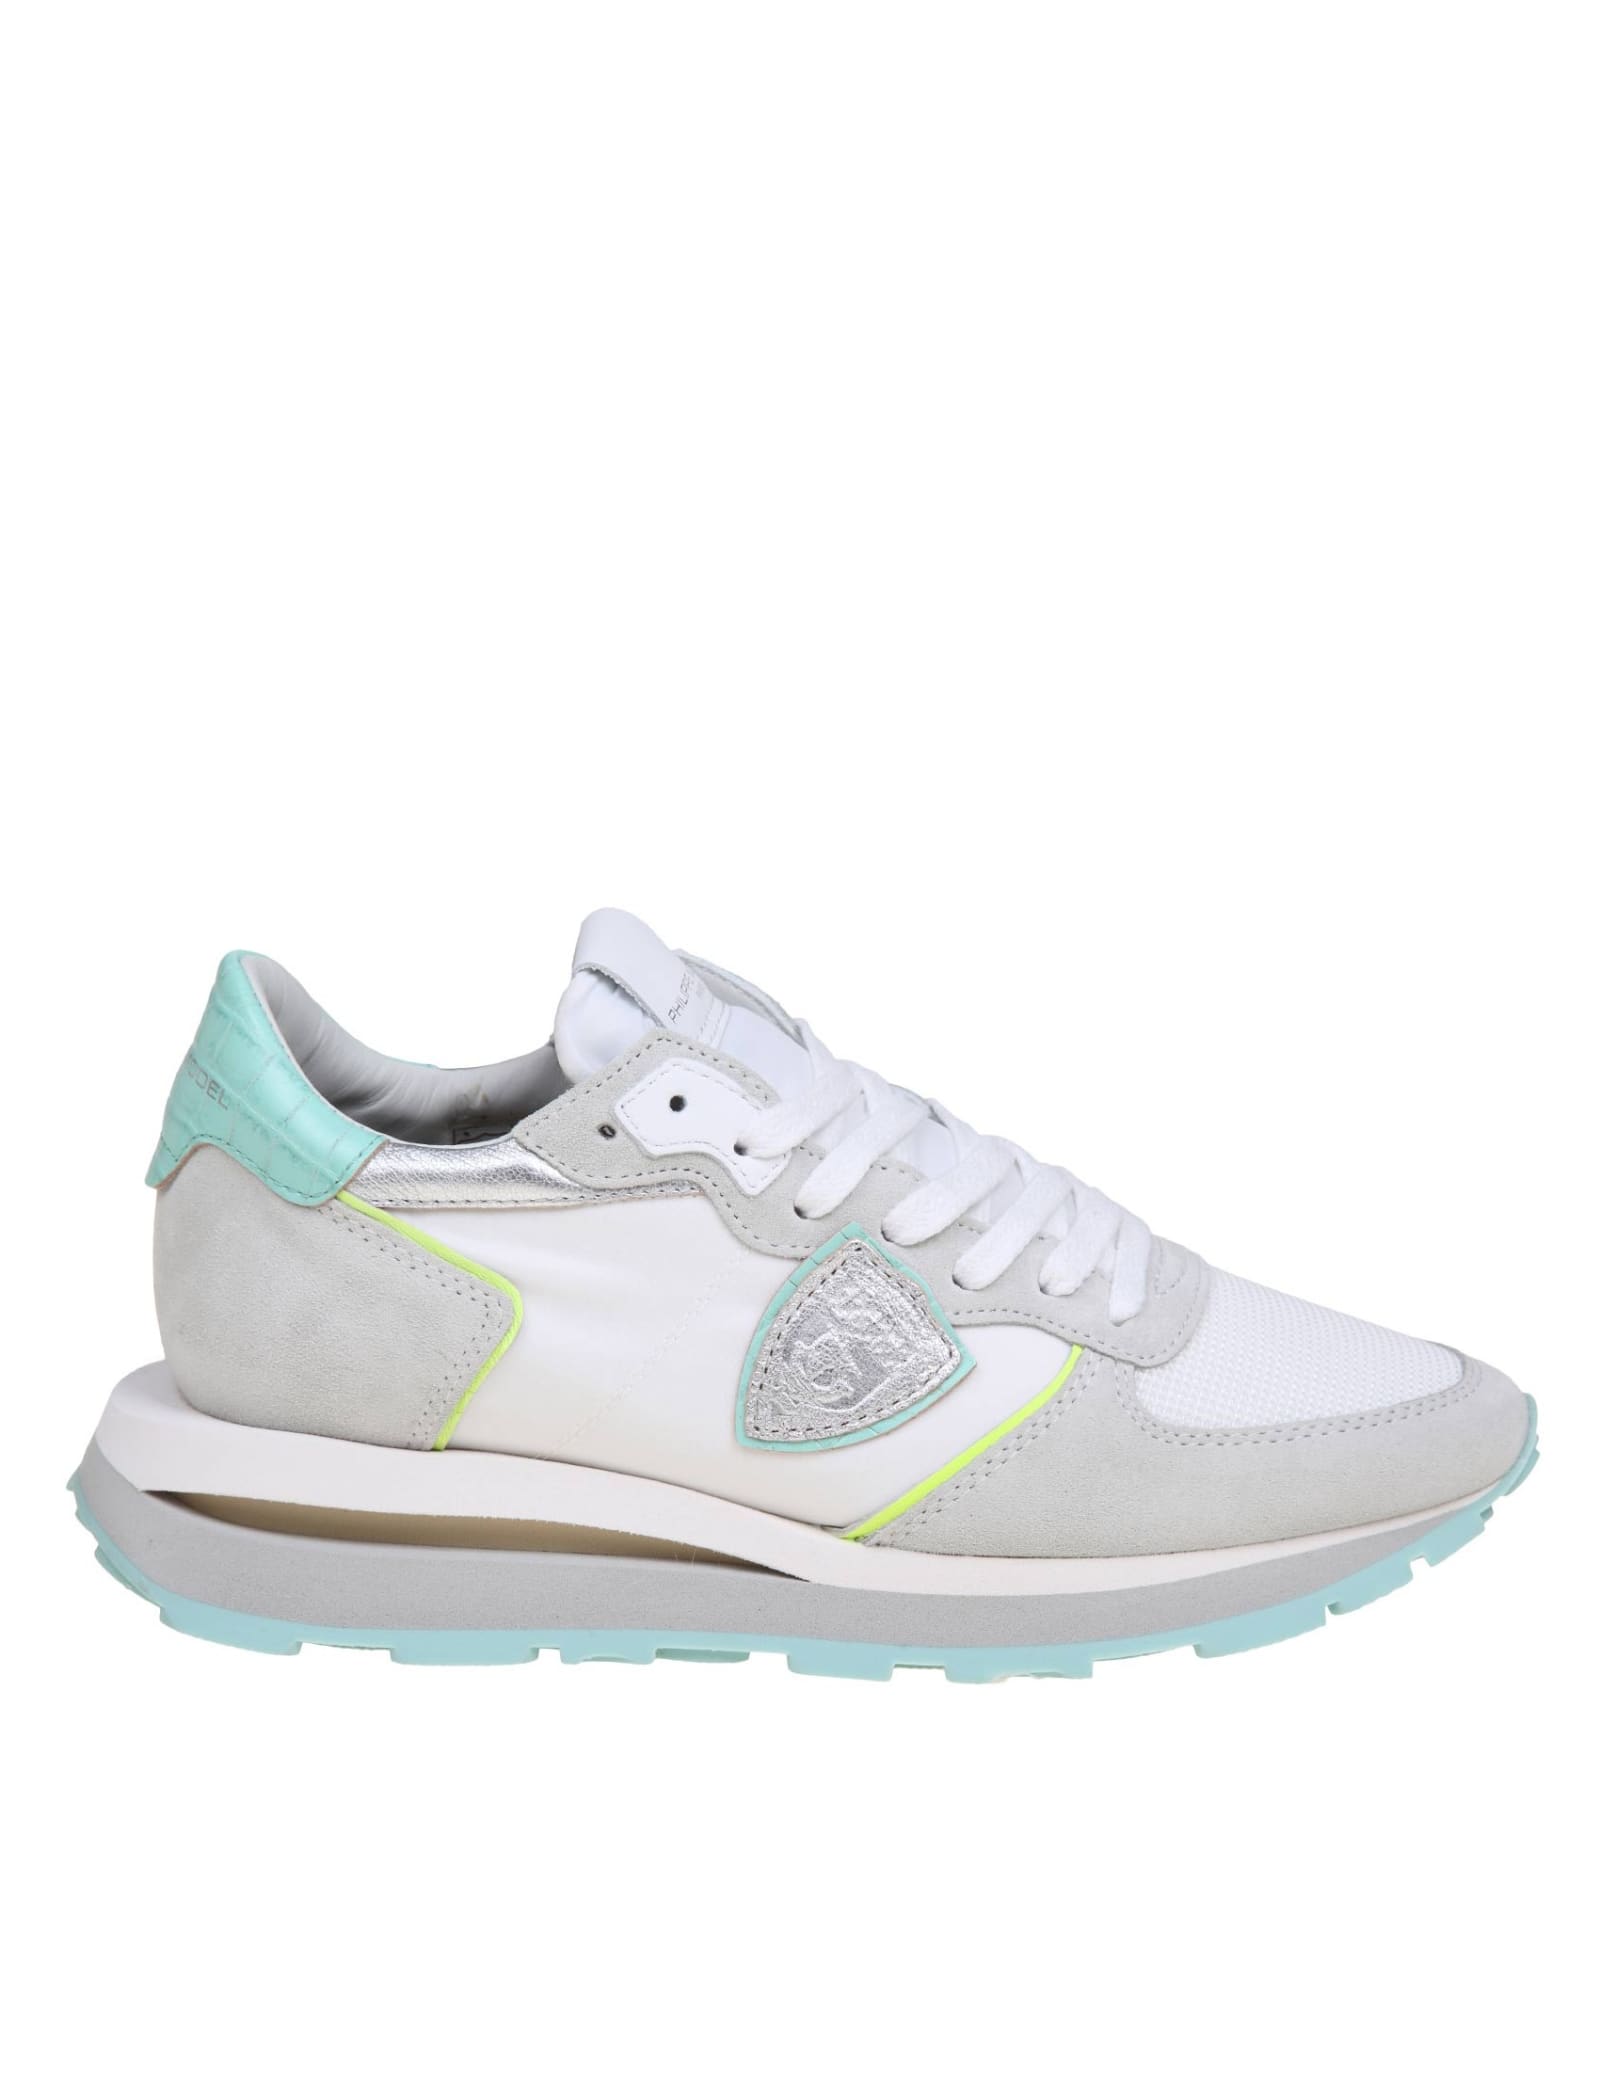 Philipp Plein Philippe Model Tropez Sneakers In Suede And Nylon Color White And Turquoise